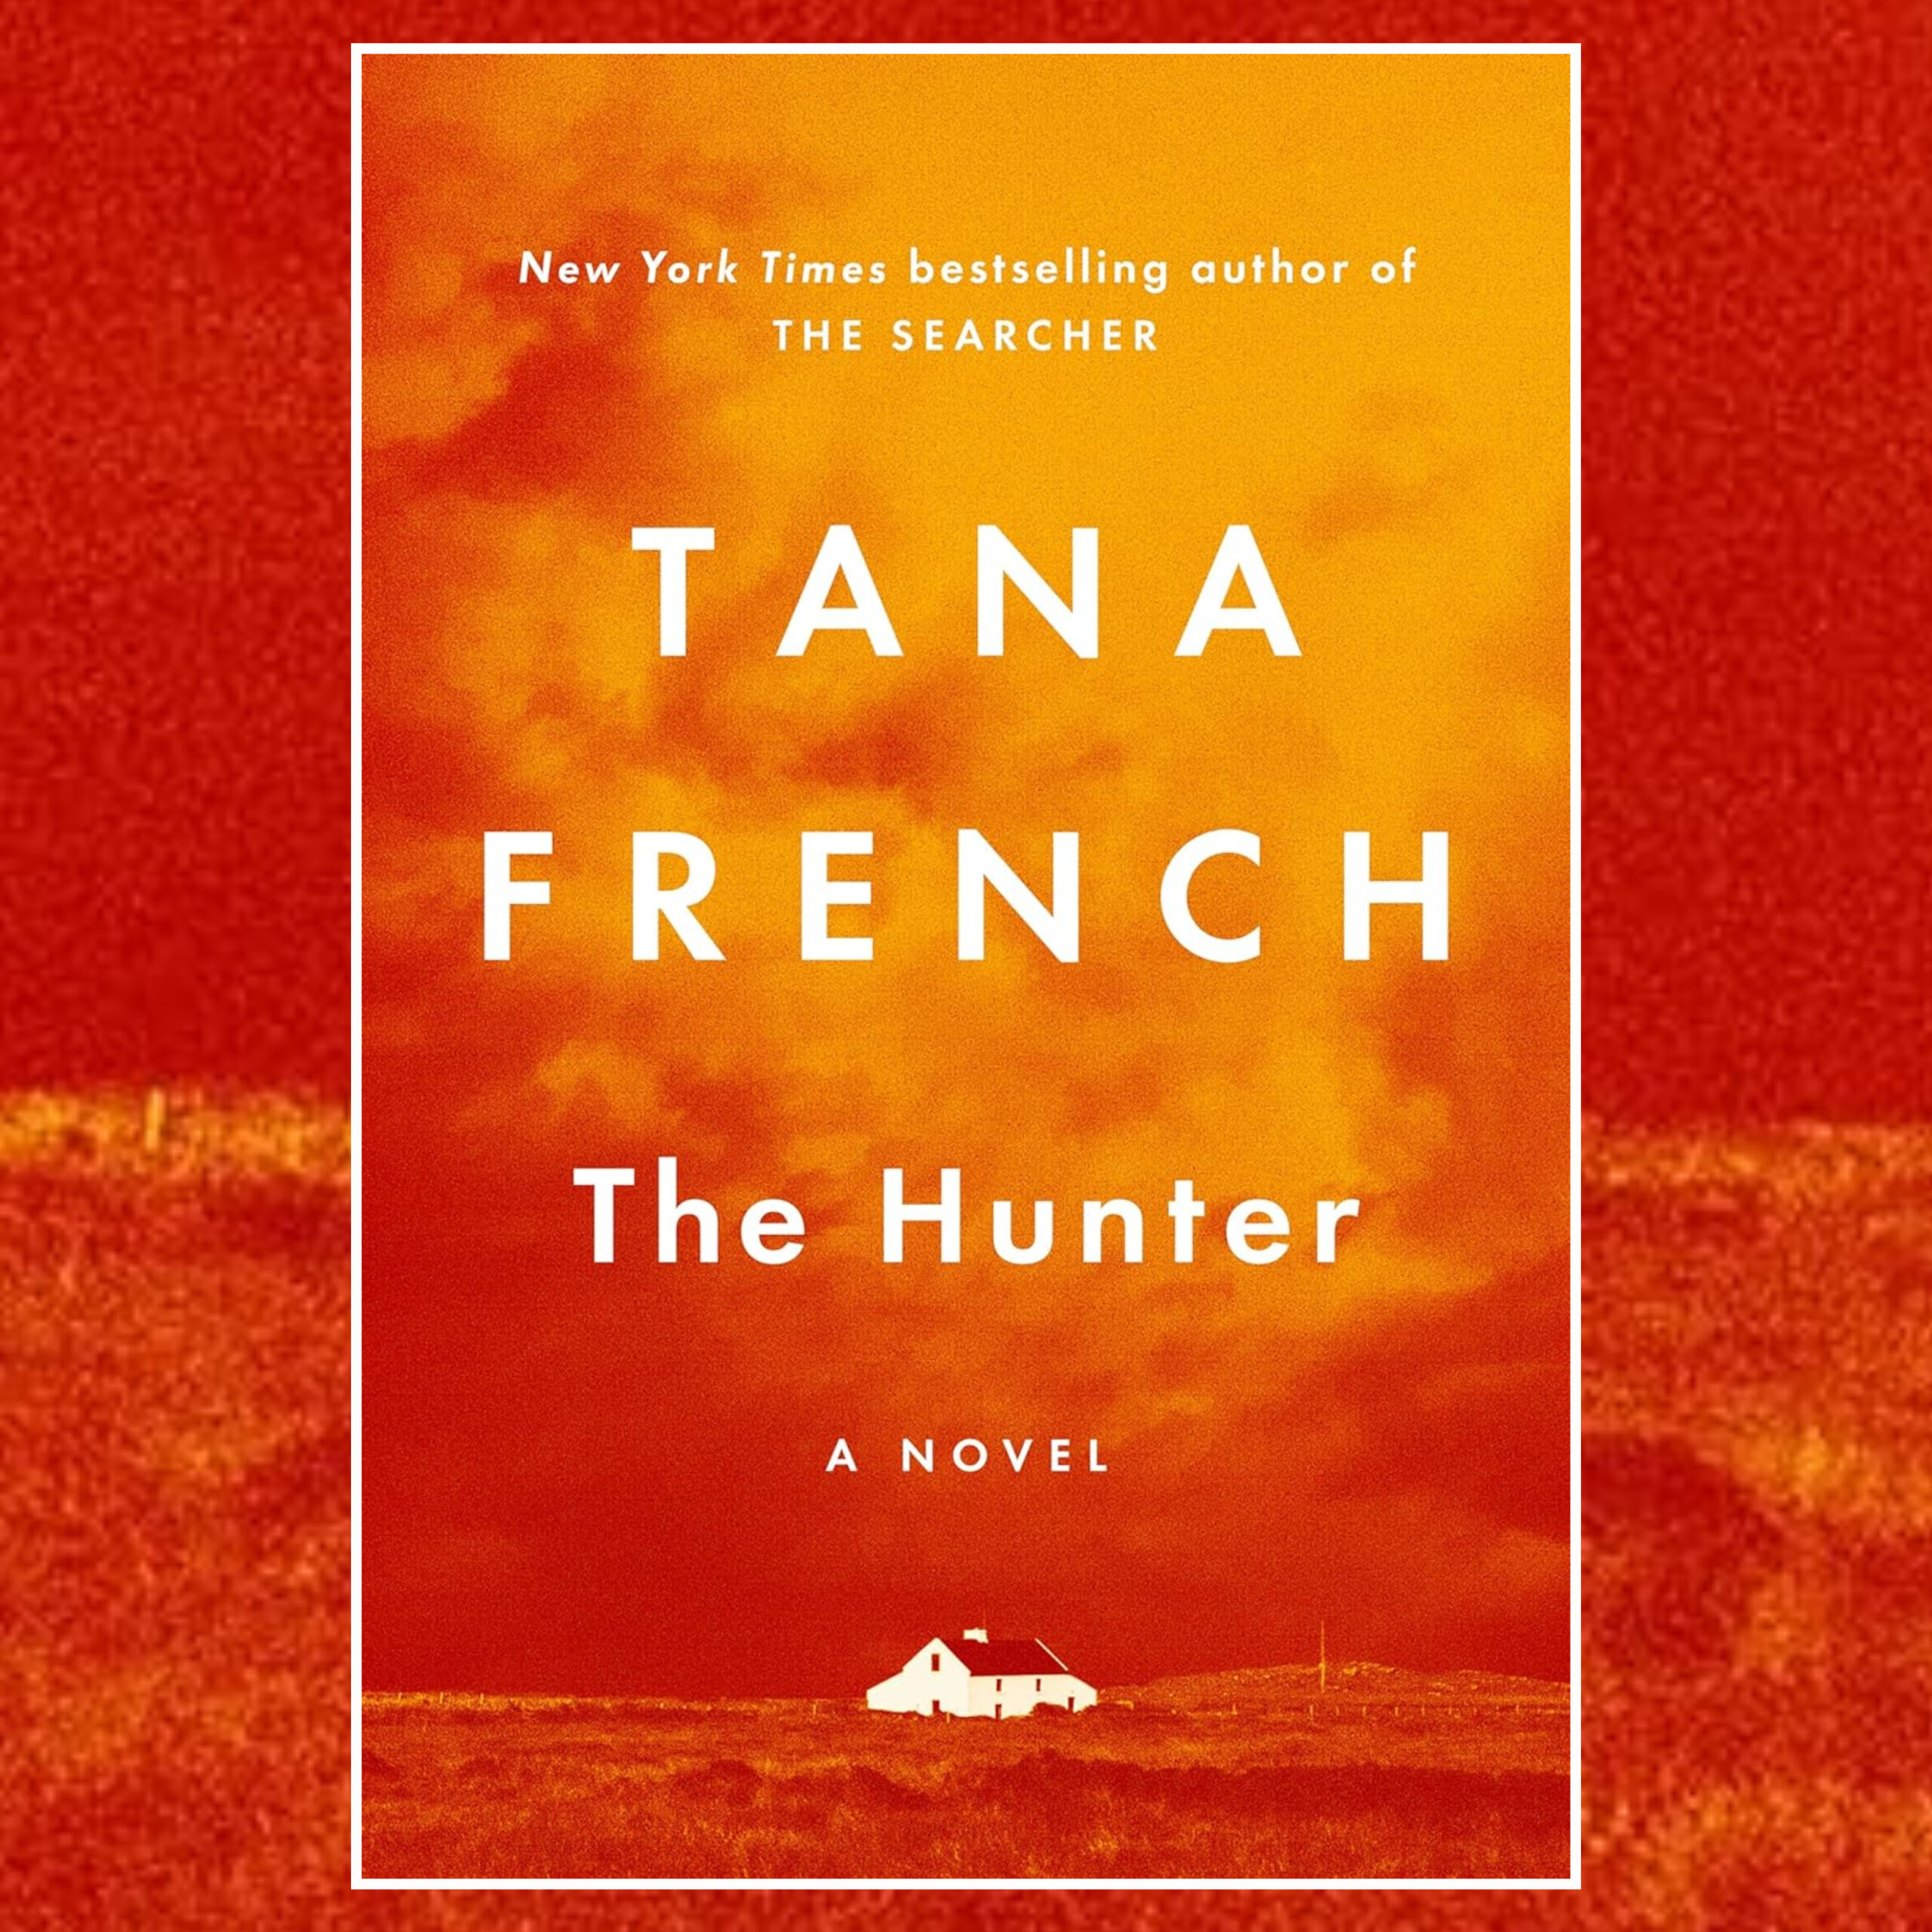 The Book Show | Tana French - The Hunter